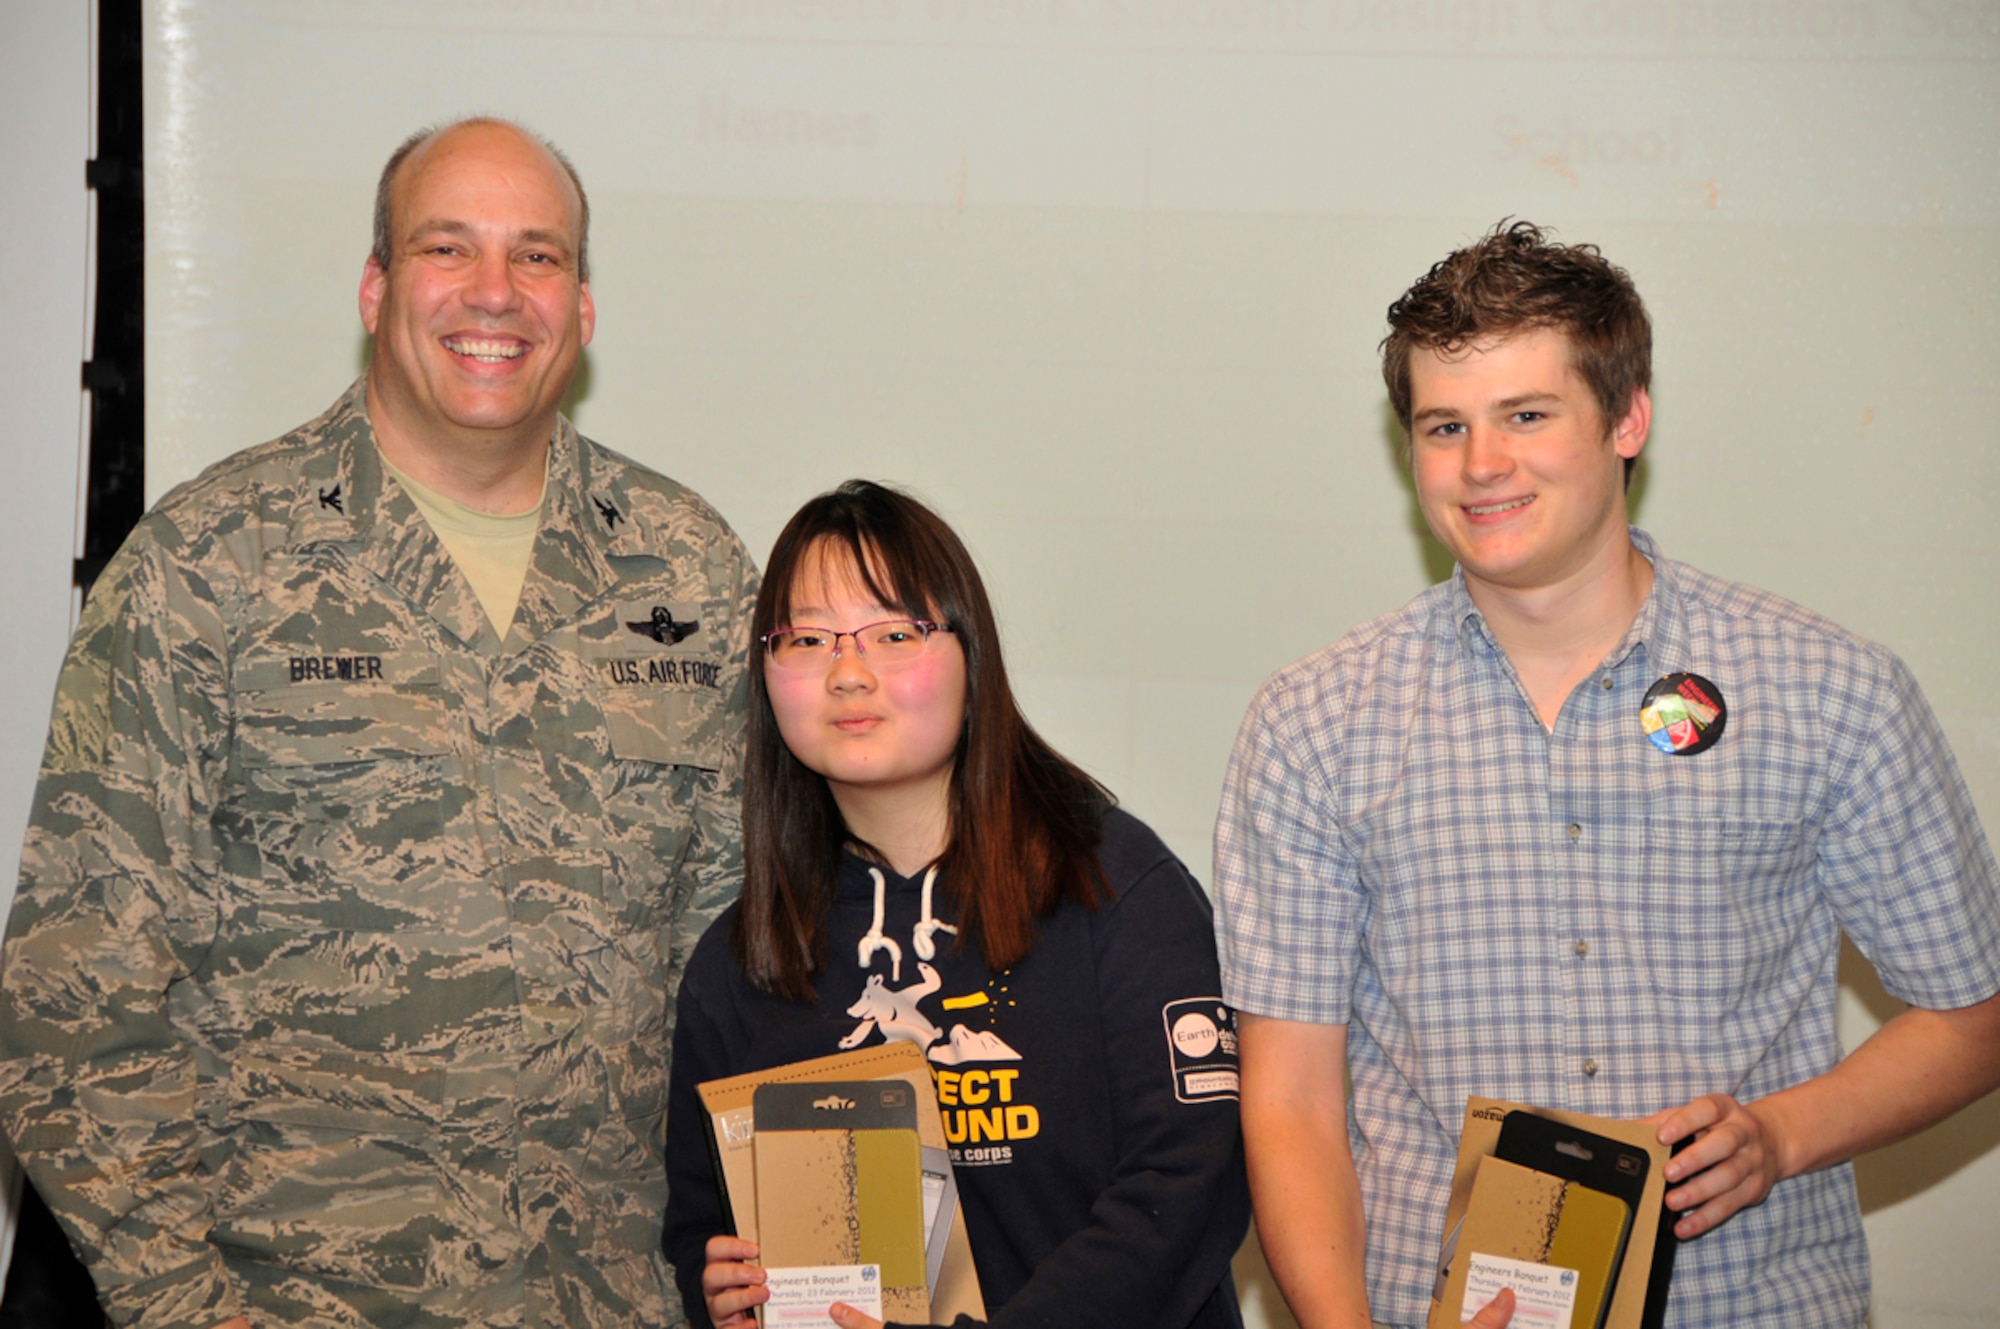 Webb School students Haena Lee and Tyler Burns pose with AEDC Commander Col. Michael Brewer after receiving first place in this year’s Student Design Competition. (Photo by Jacqueline Cowan)